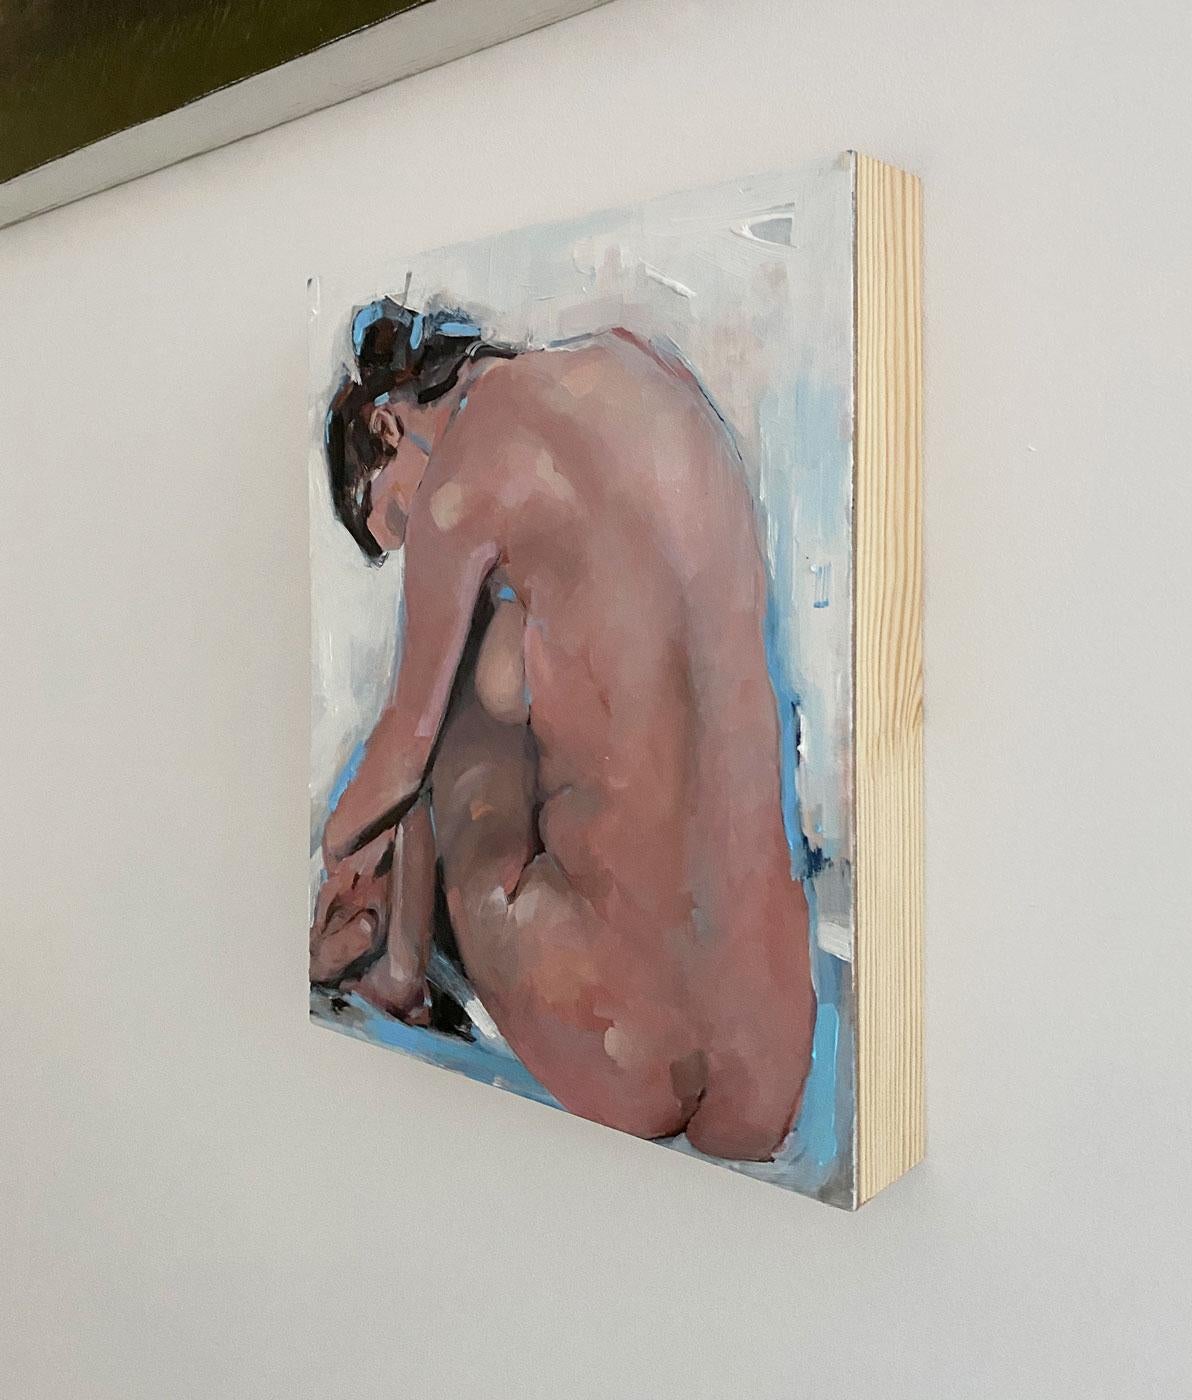 This abstract figurative painting by Kelly Rossetti is made with oil paint on cradled board. It captures a view from behind a nude woman who is hugging her legs to her chest. While the form is overall a deep, warm color, the artist has added